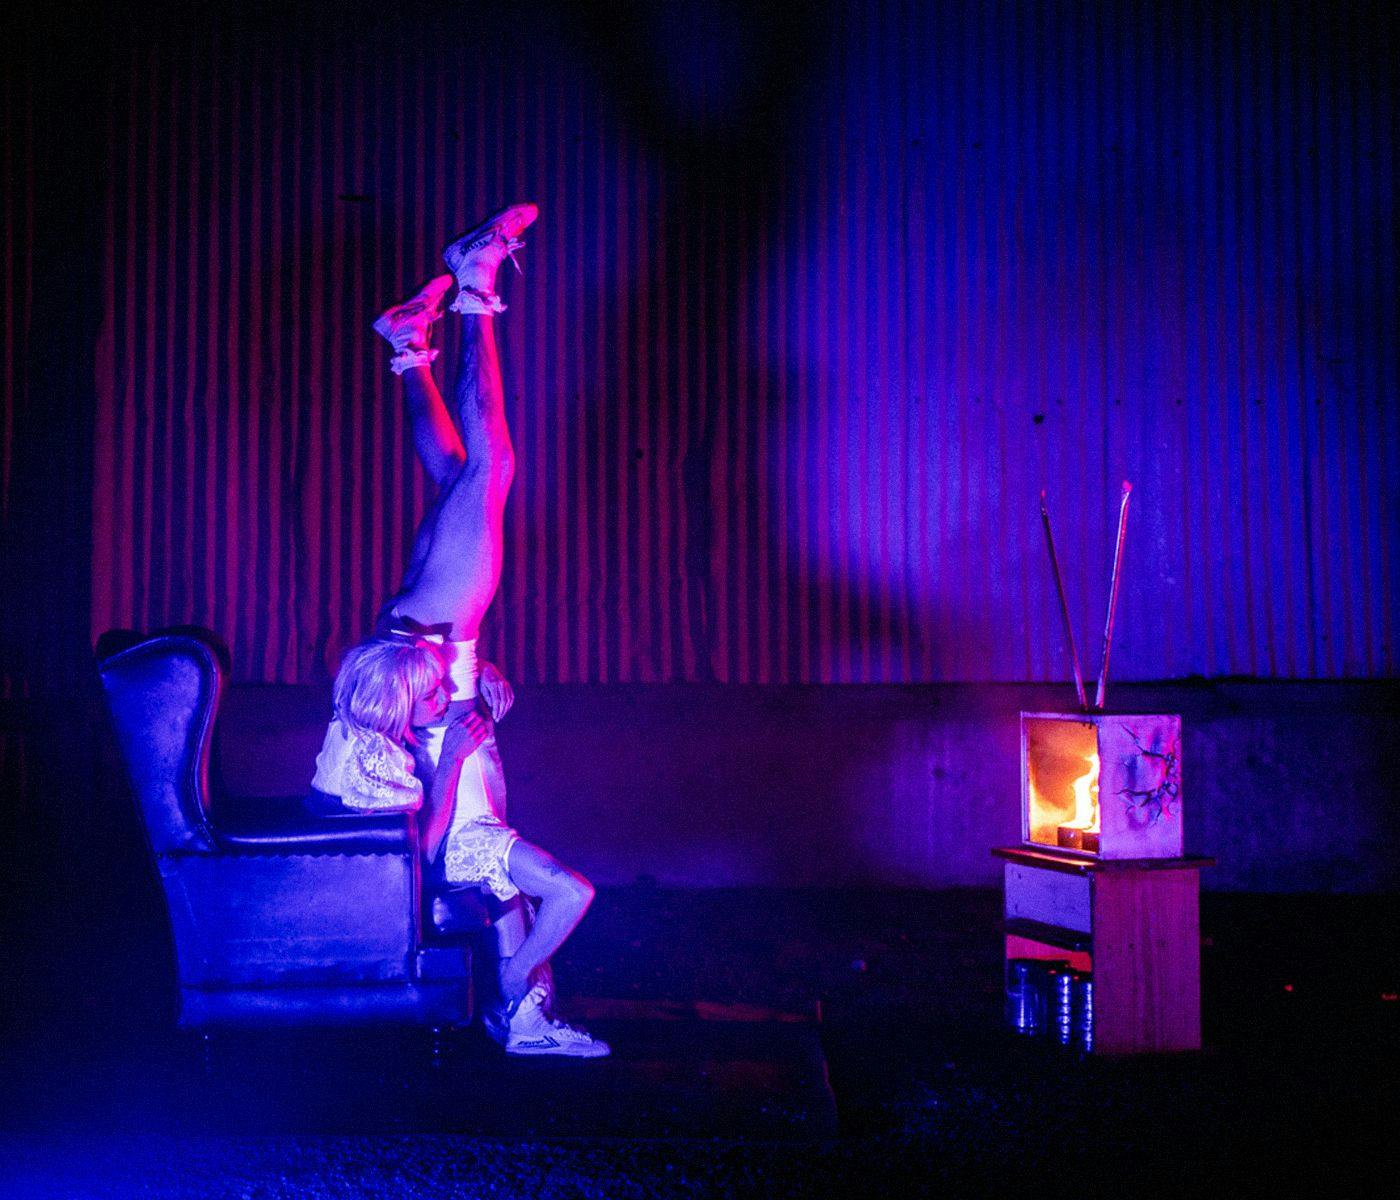 Two people sit on a chair watching a burning TV. One person is upside down with their legs in the air.